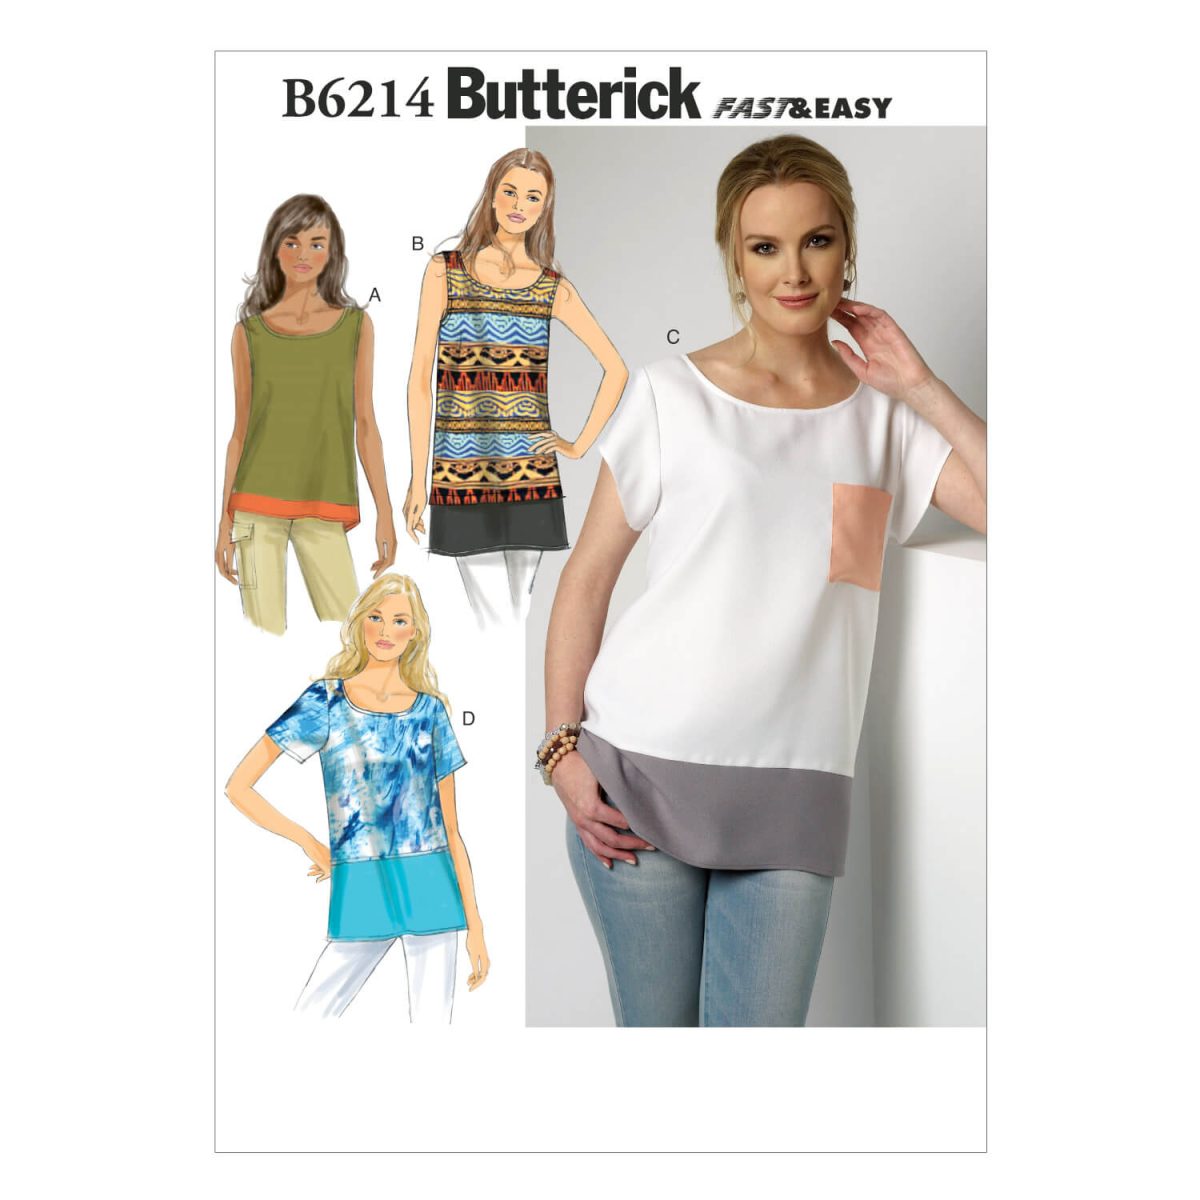 Butterick Sewing Pattern B6214 Misses' Top